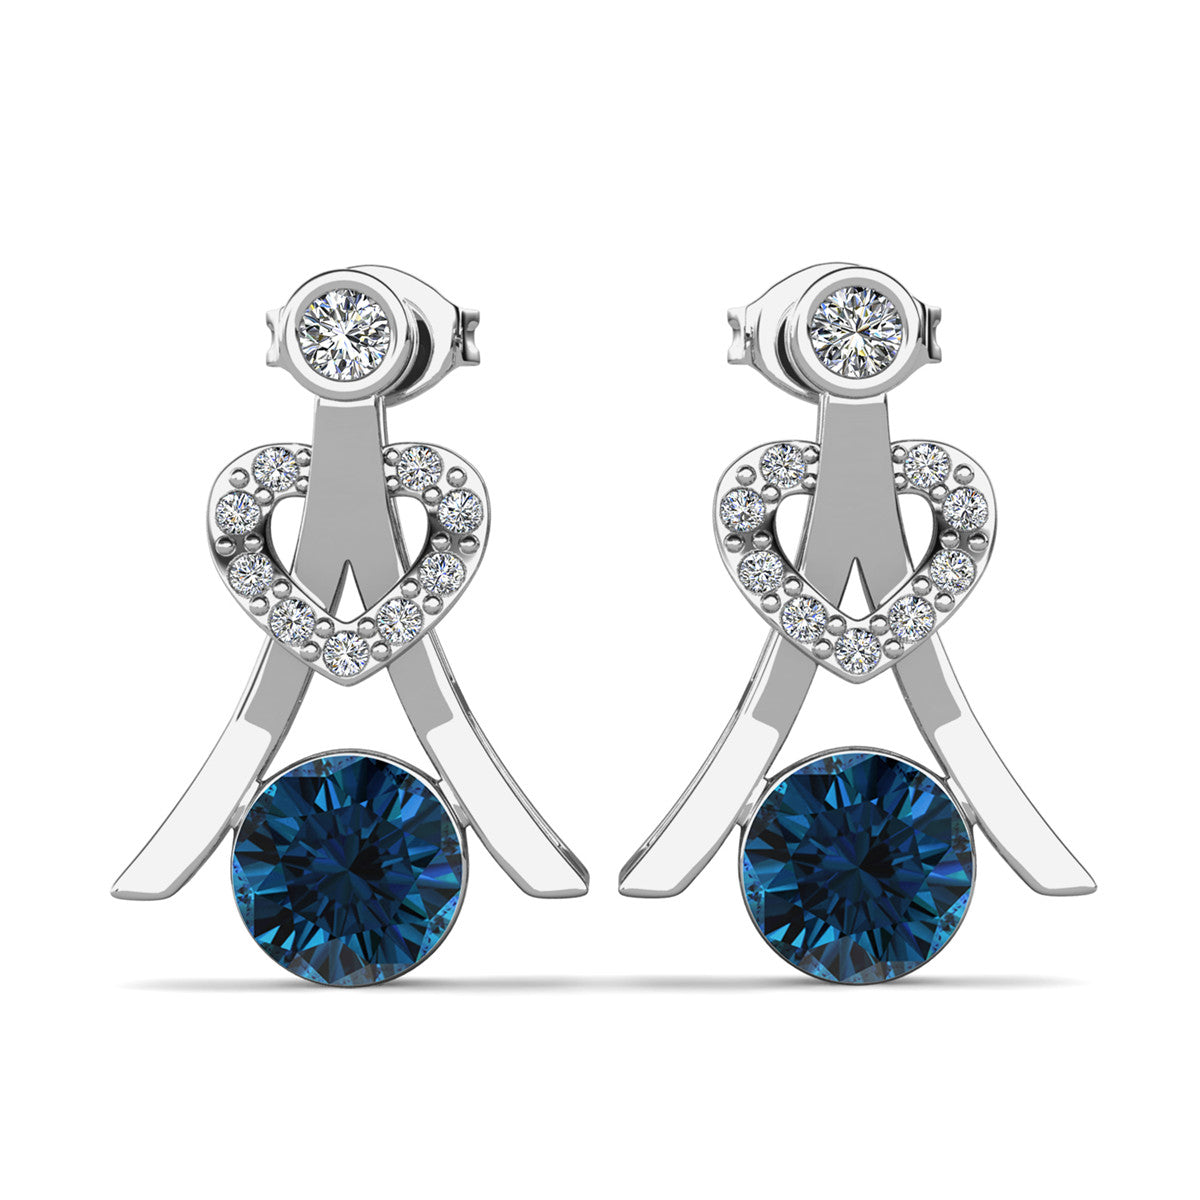 Serenity Birthstone Earrings 18k White Gold Plated with Round Cut Crystals